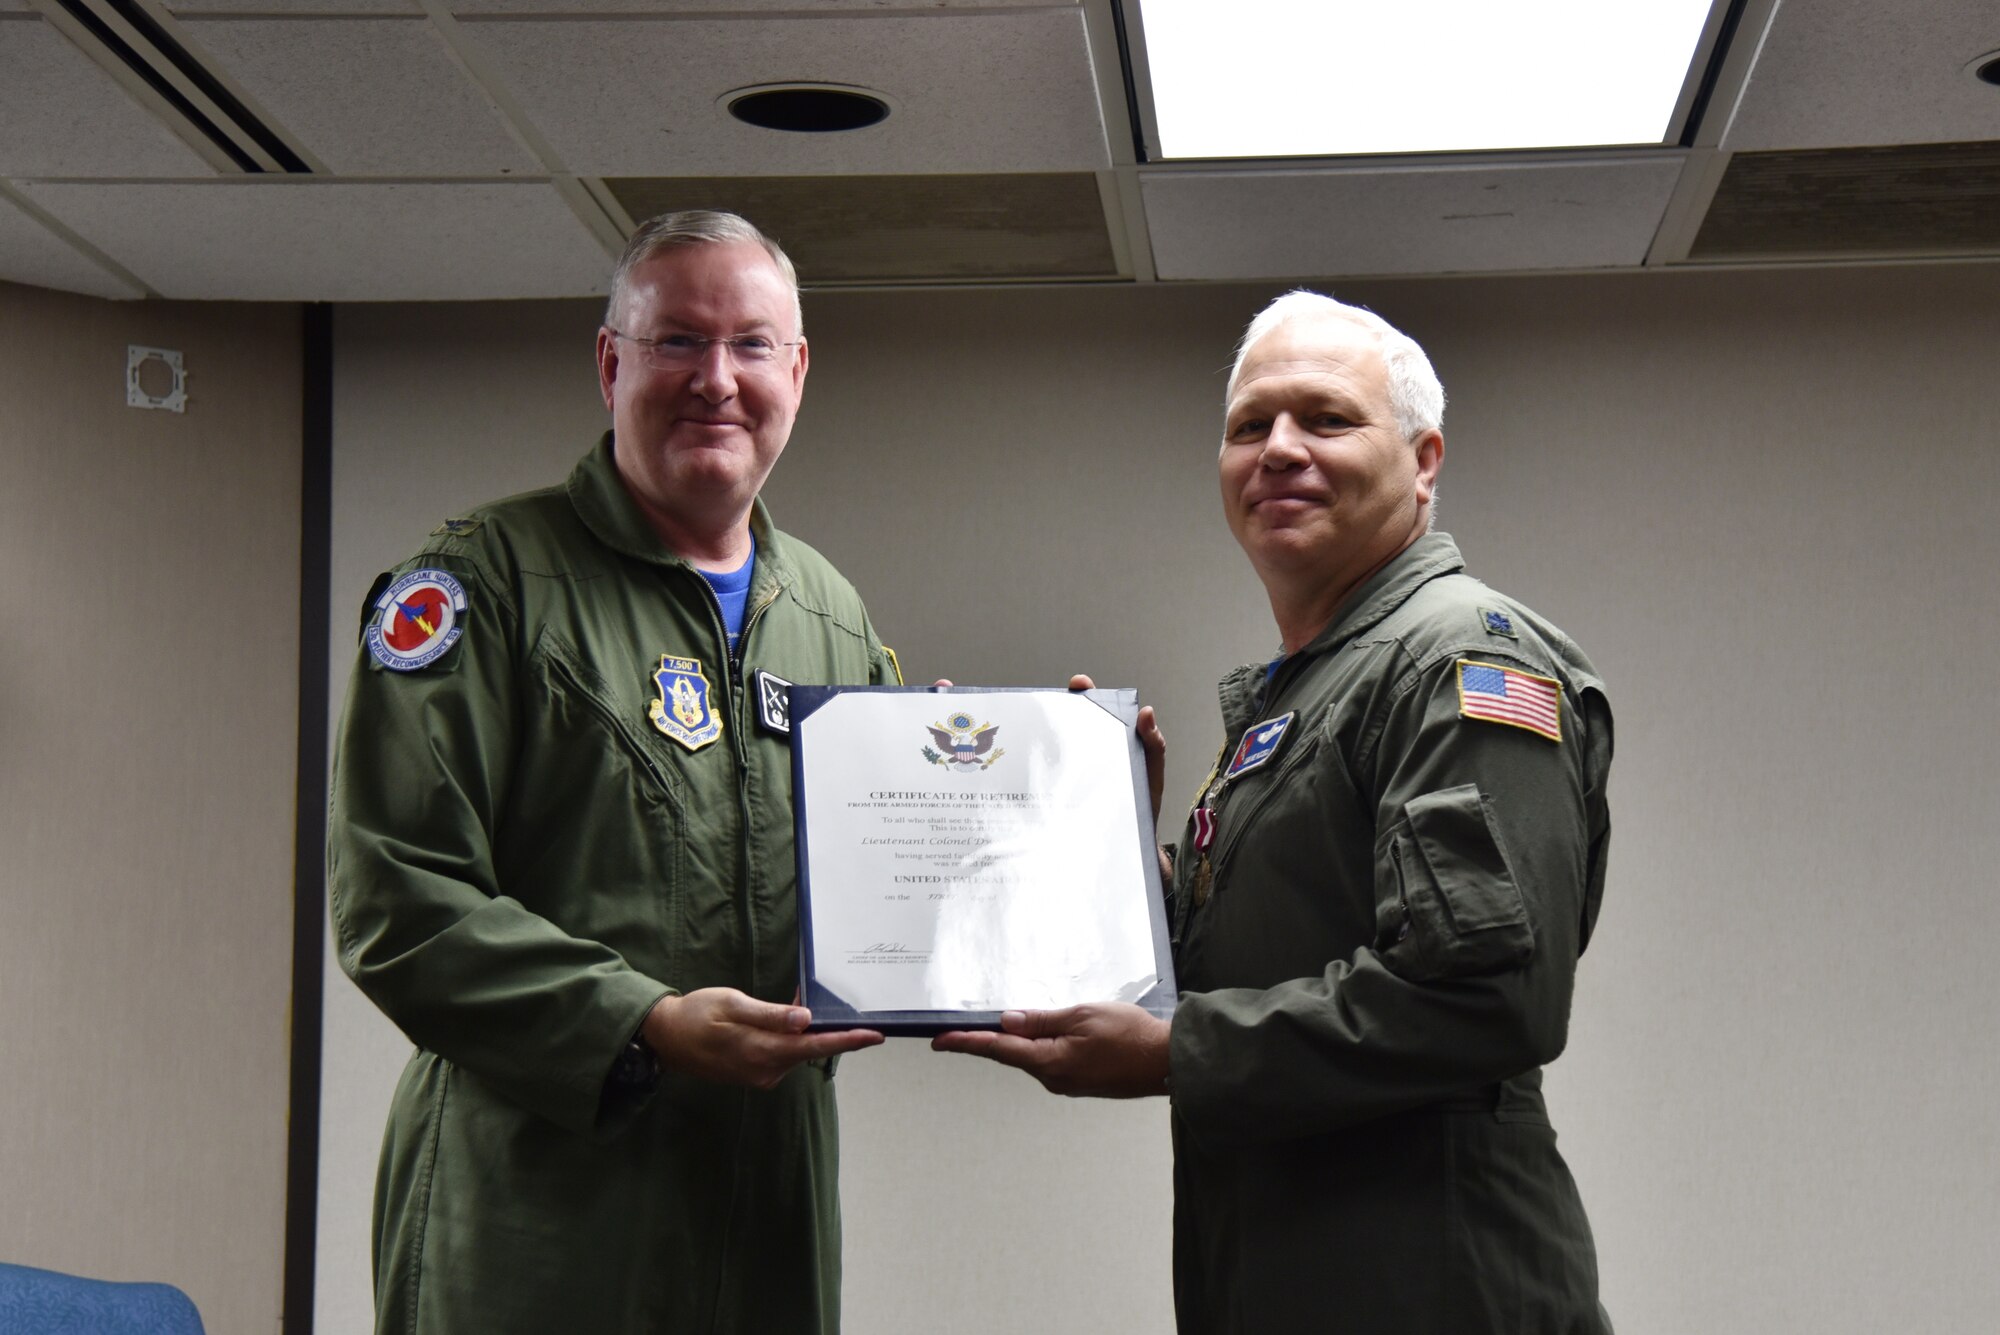 Col. Jeff Van Dootingh on left and Lt. Col. Dwayne Russell on right posing for a photo holding Russell's retirement certificate between them.